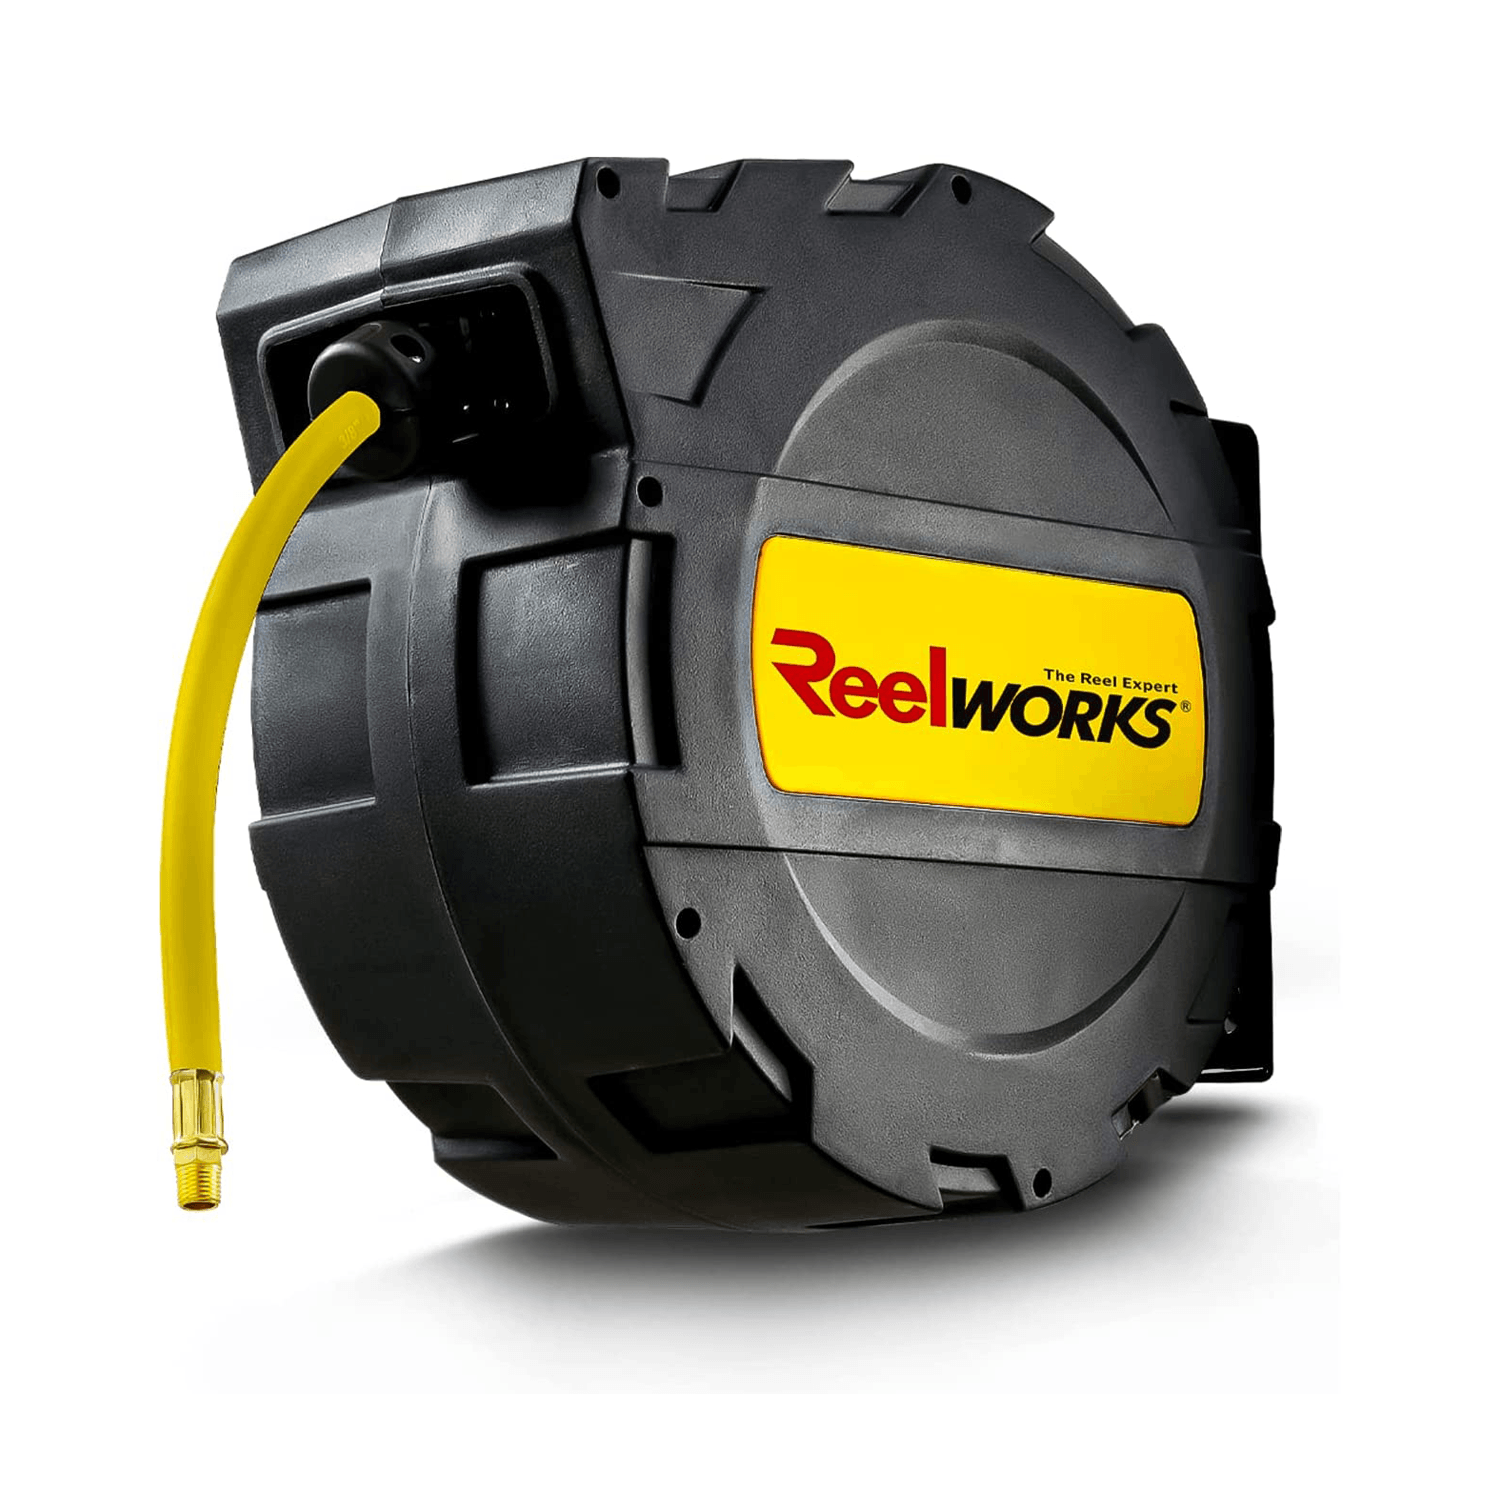 ReelWorks Mountable Retractable Air Hose Reel - 3/8" x 50'FT, 3' Ft Lead-In Hose, 1/4" NPT Connections - DIY Tools by GreatCircleUS